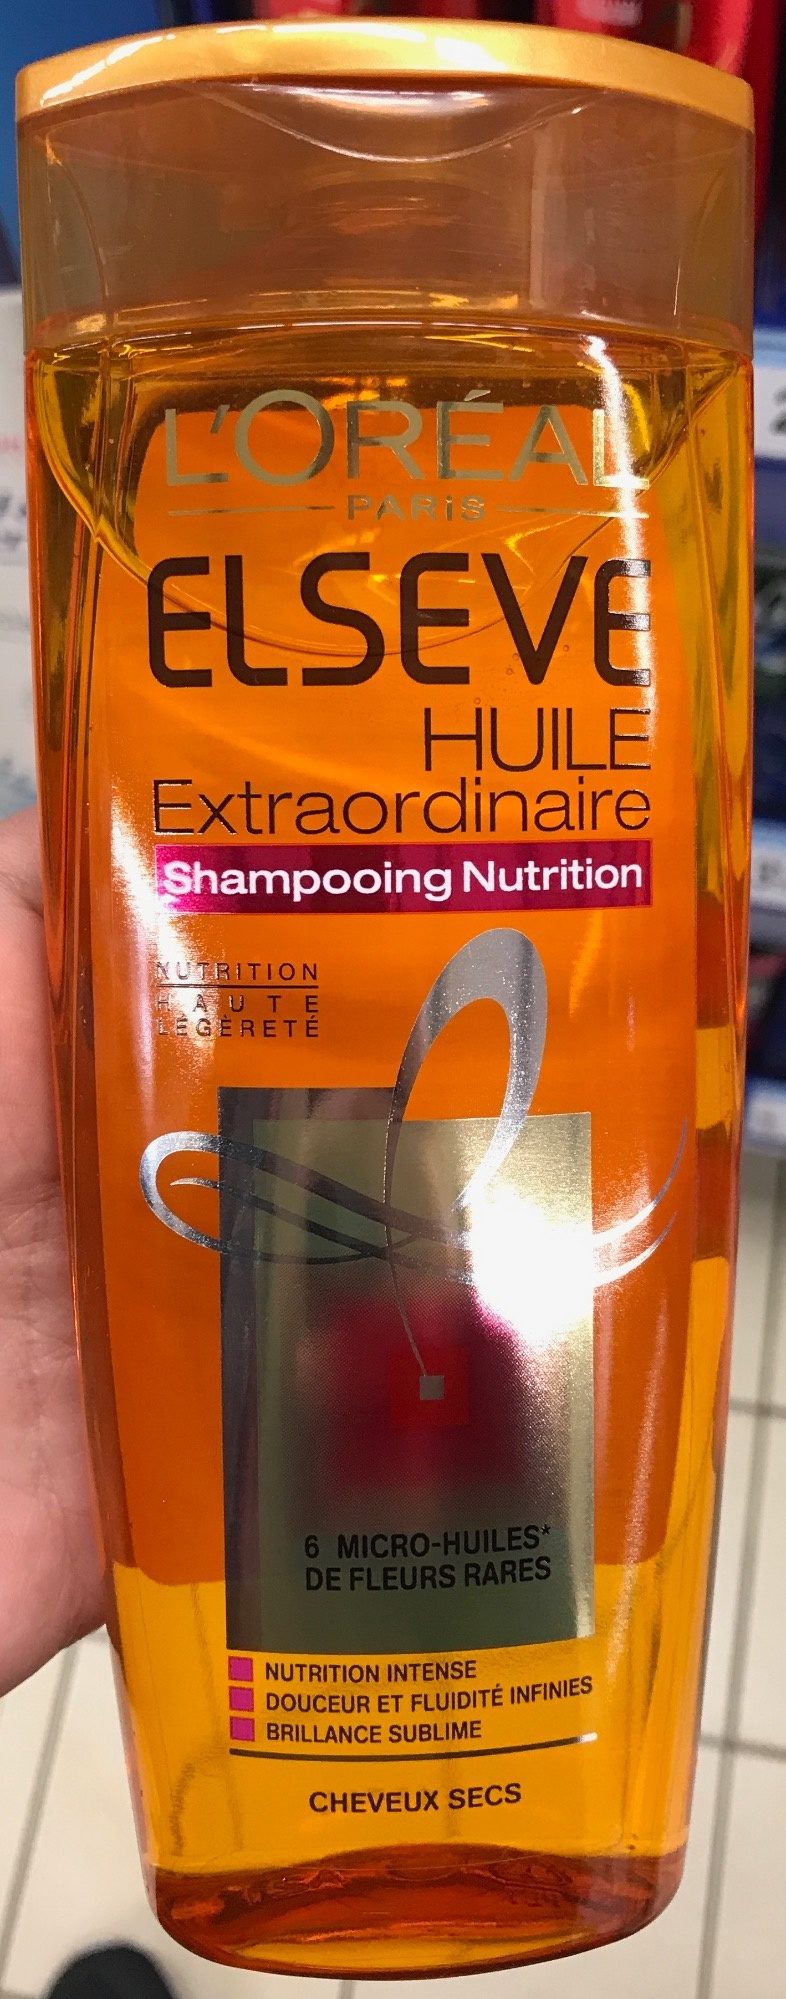 Elseve Huile extraordinaire Shampooing Nutrition - Product - fr